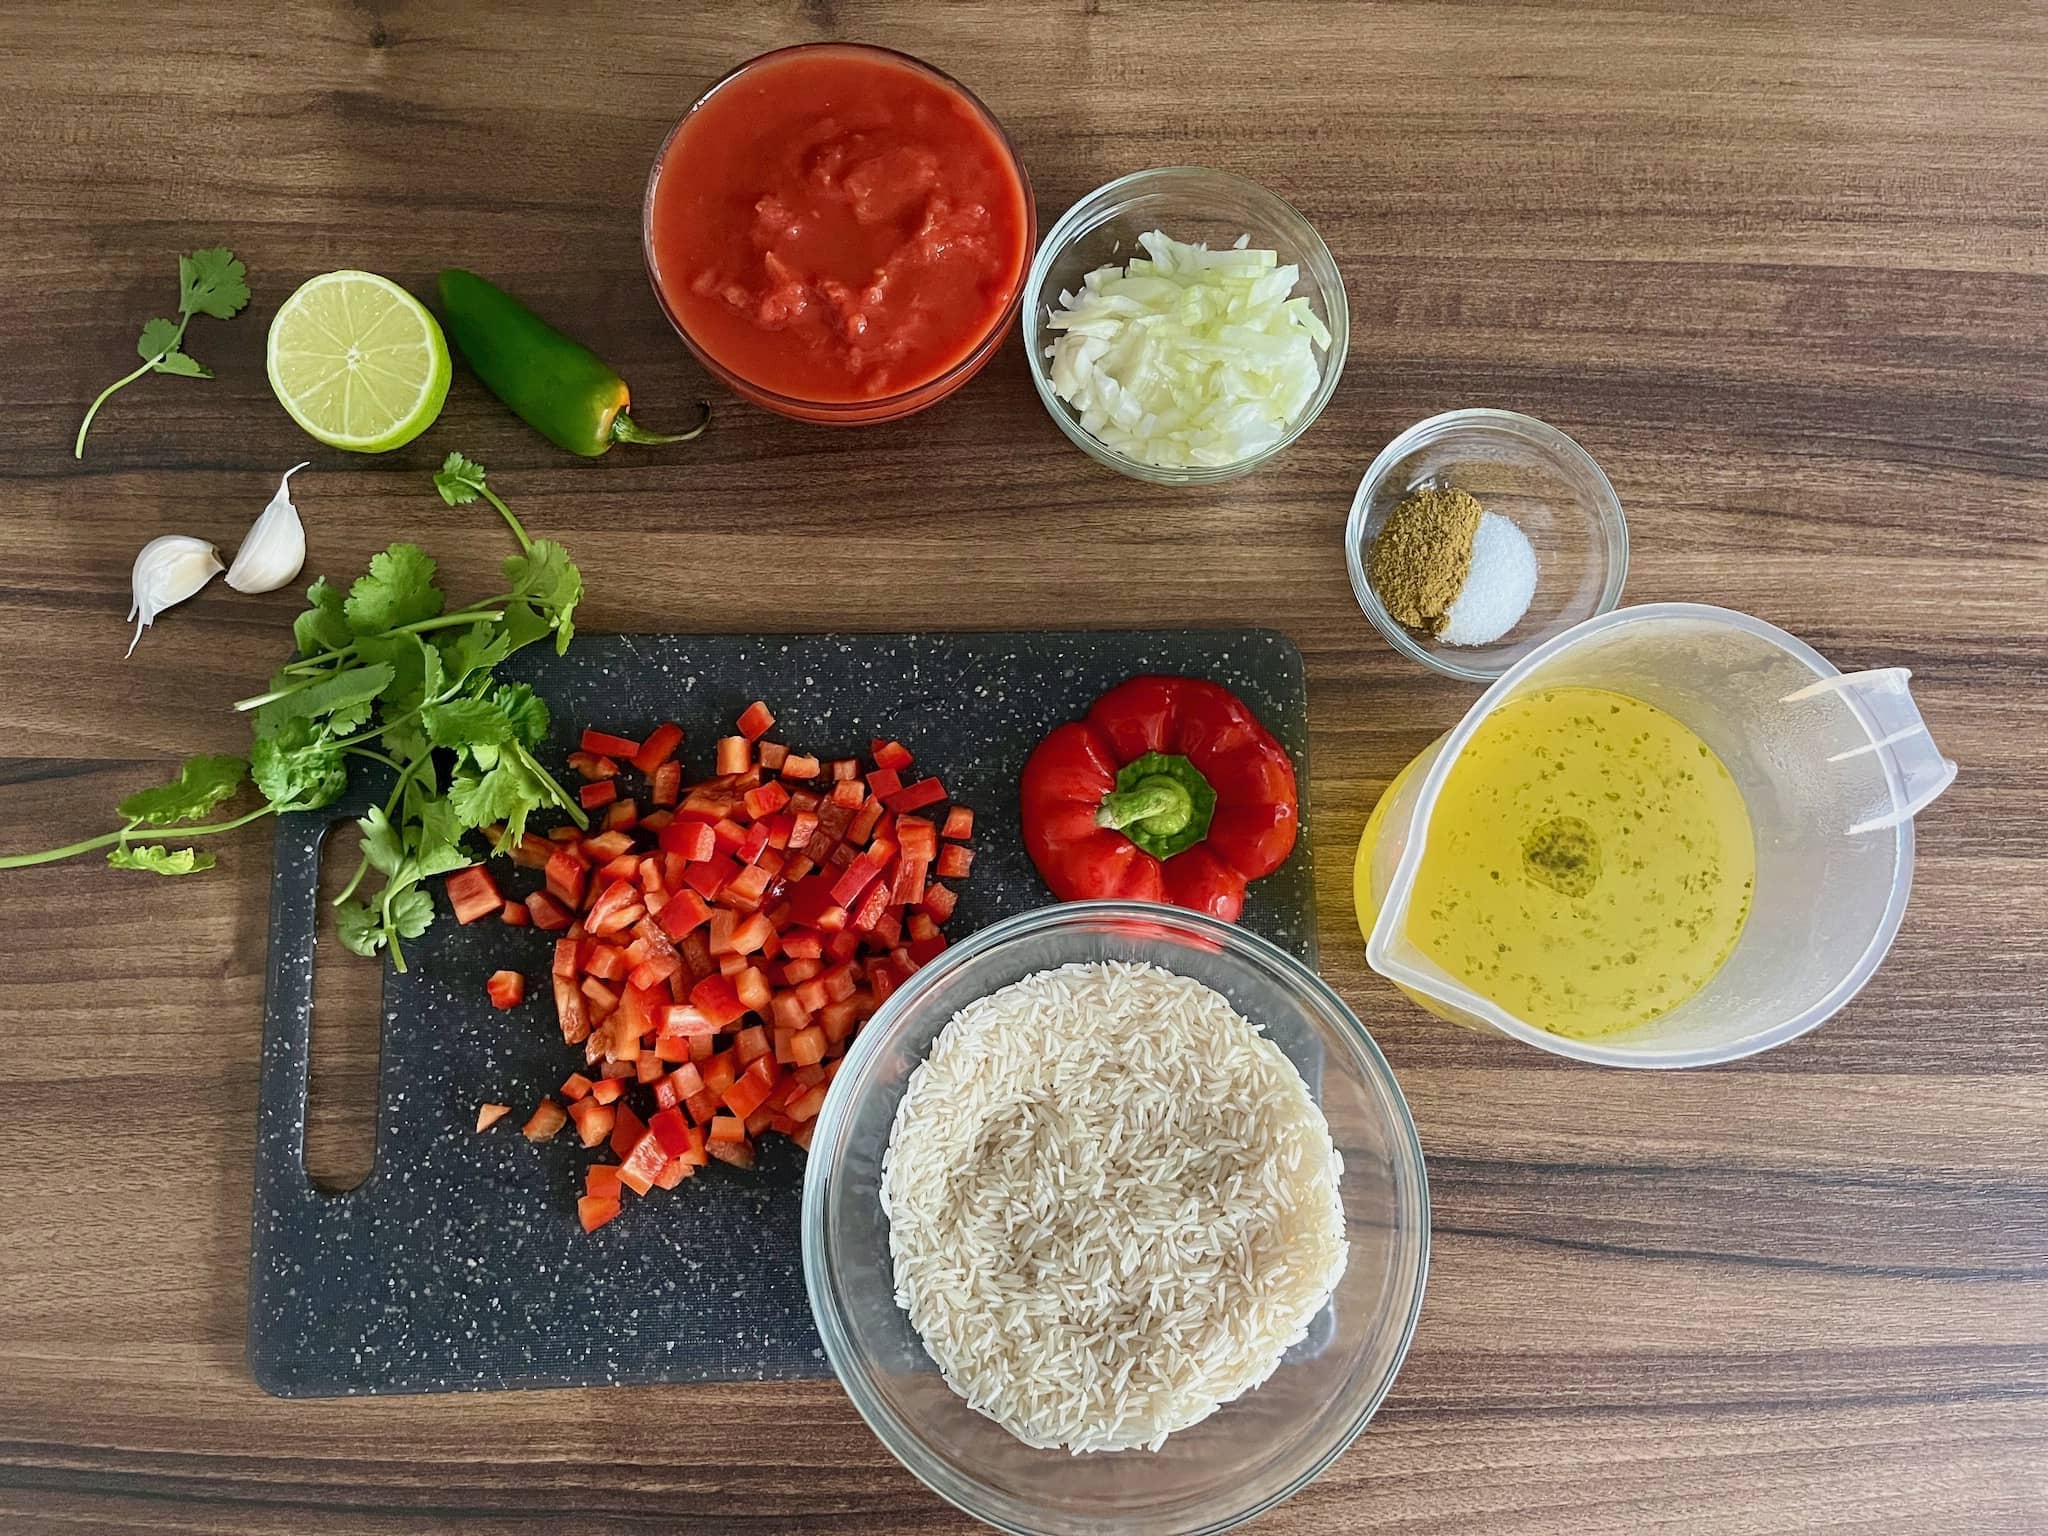 All the ingredients ready to make Mexican Rice